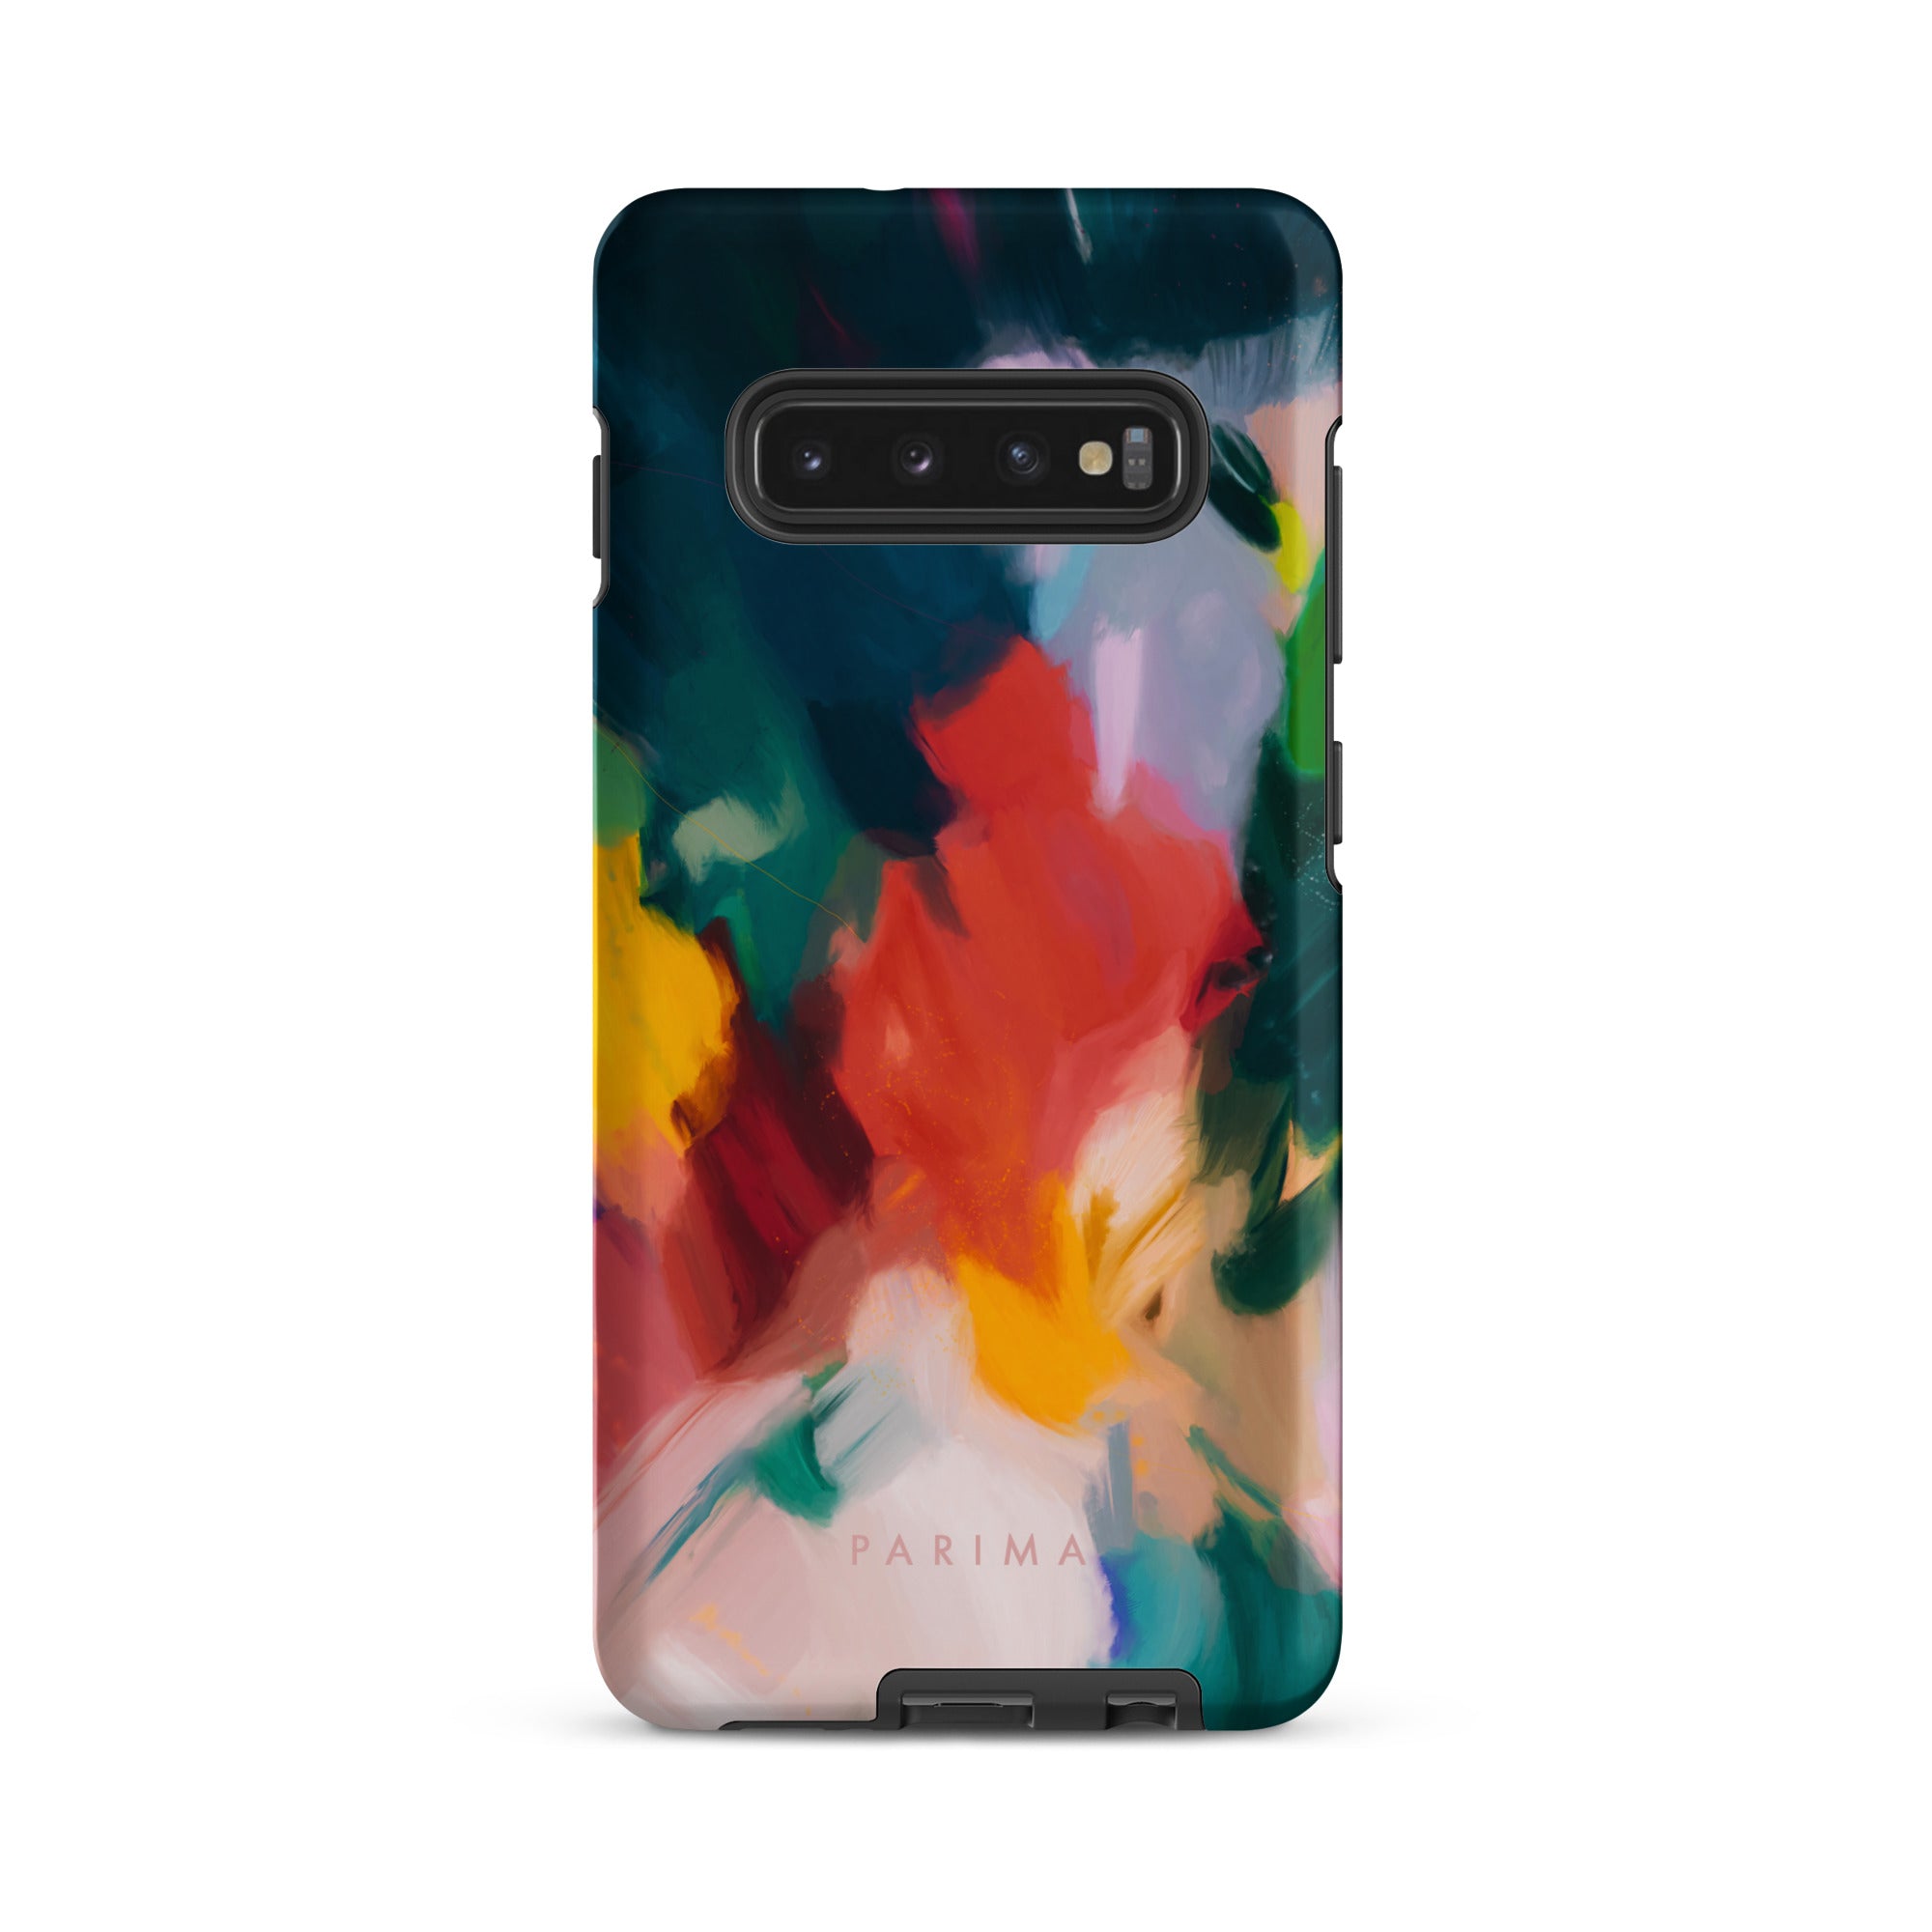 Pomme, blue and red abstract art on Samsung Galaxy S10 Plus tough case by Parima Studio